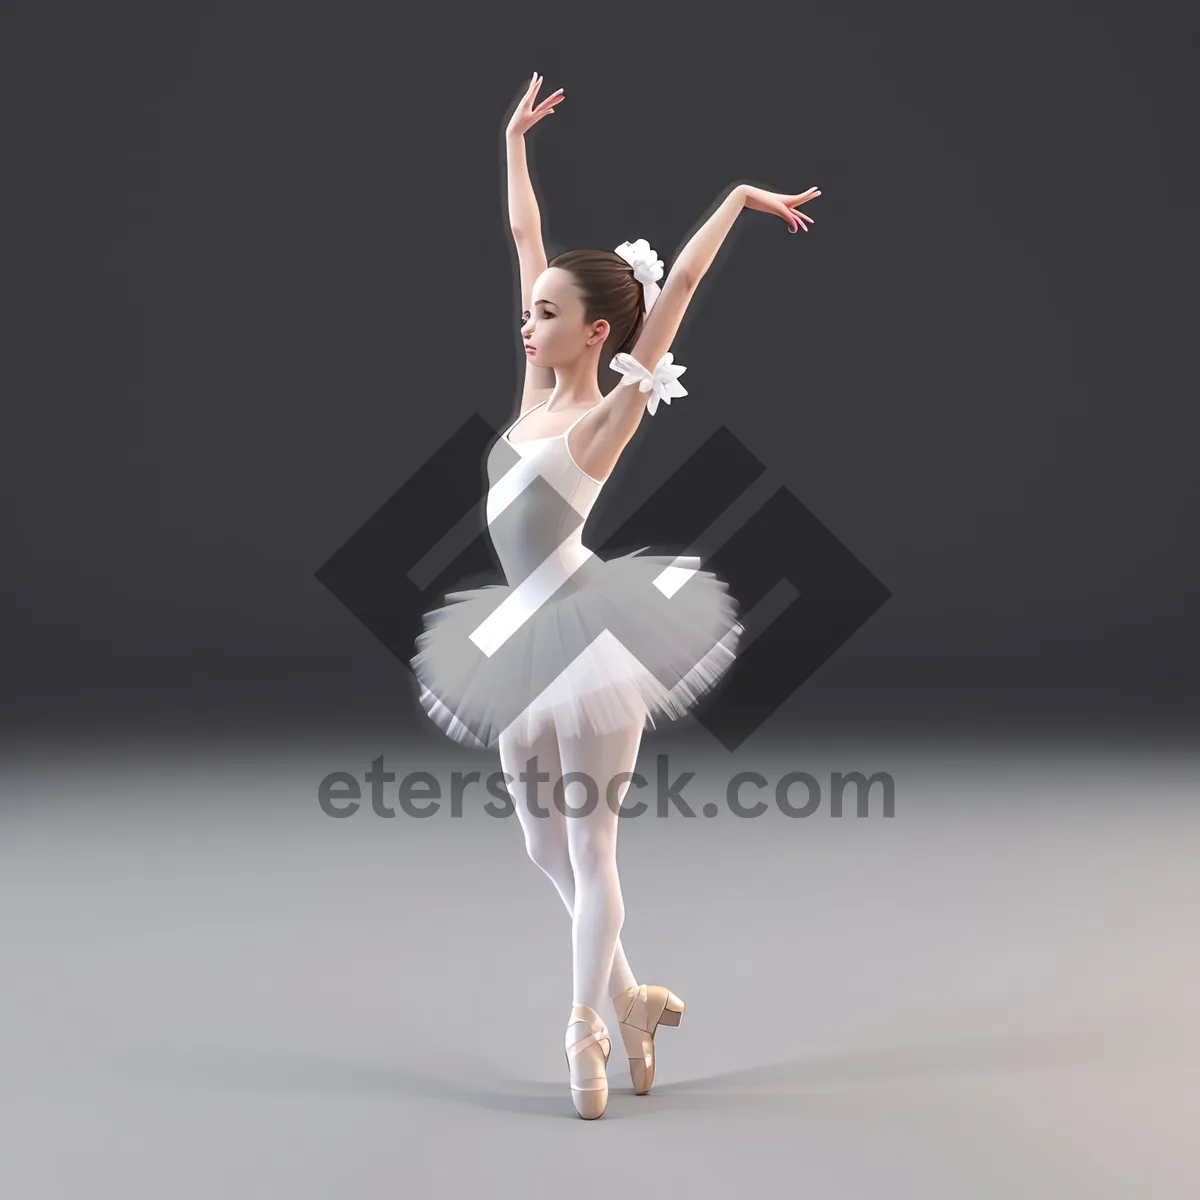 Picture of Elegant ballet performer in mid-air jump